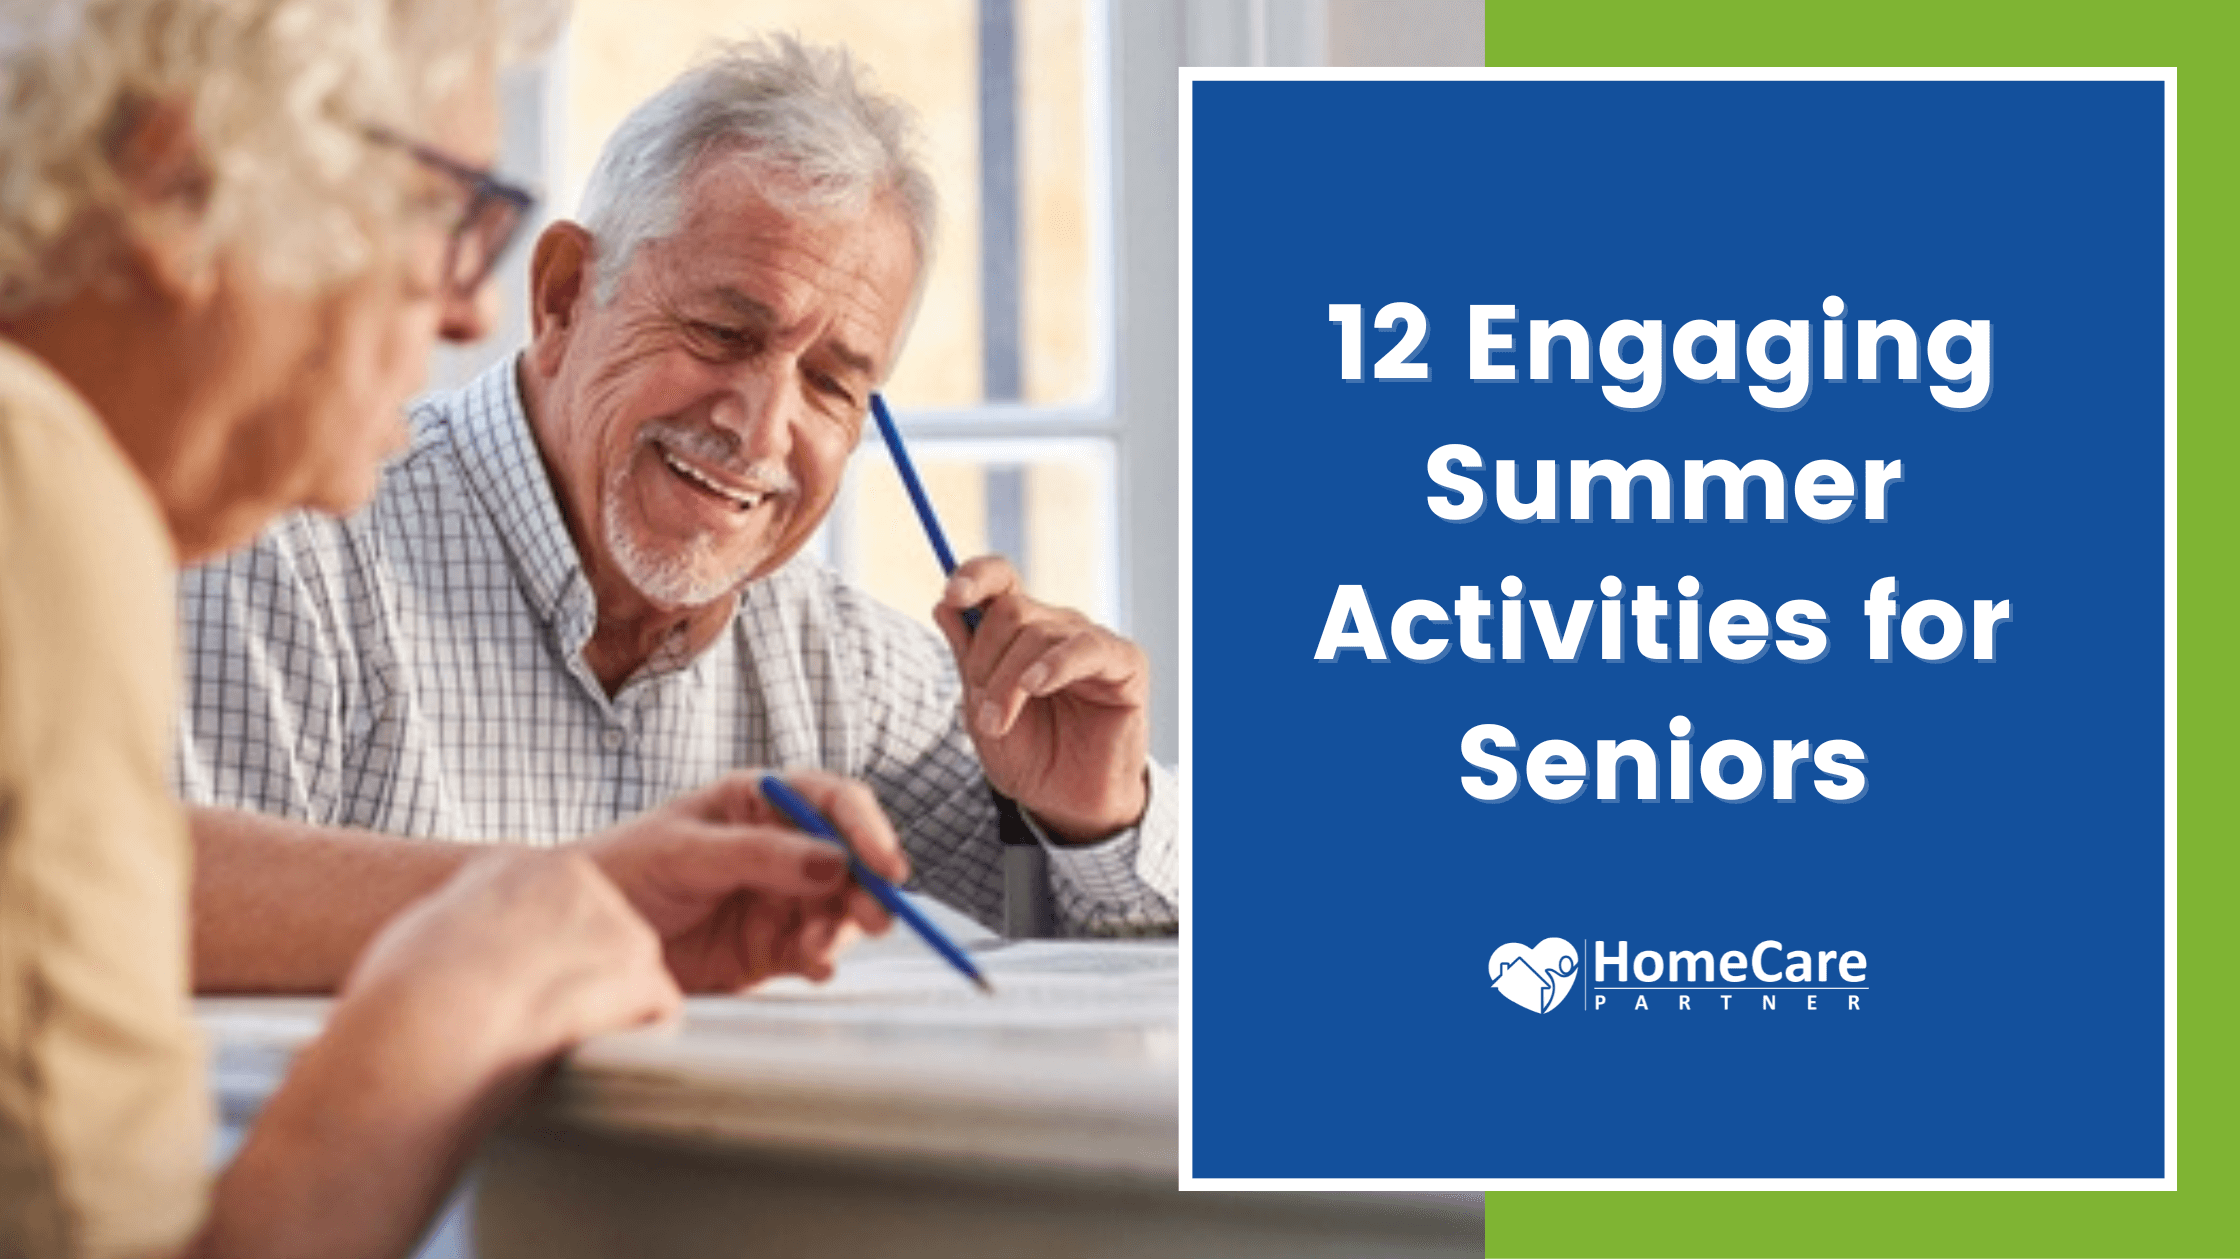 12 Engaging Summer Activities for Seniors